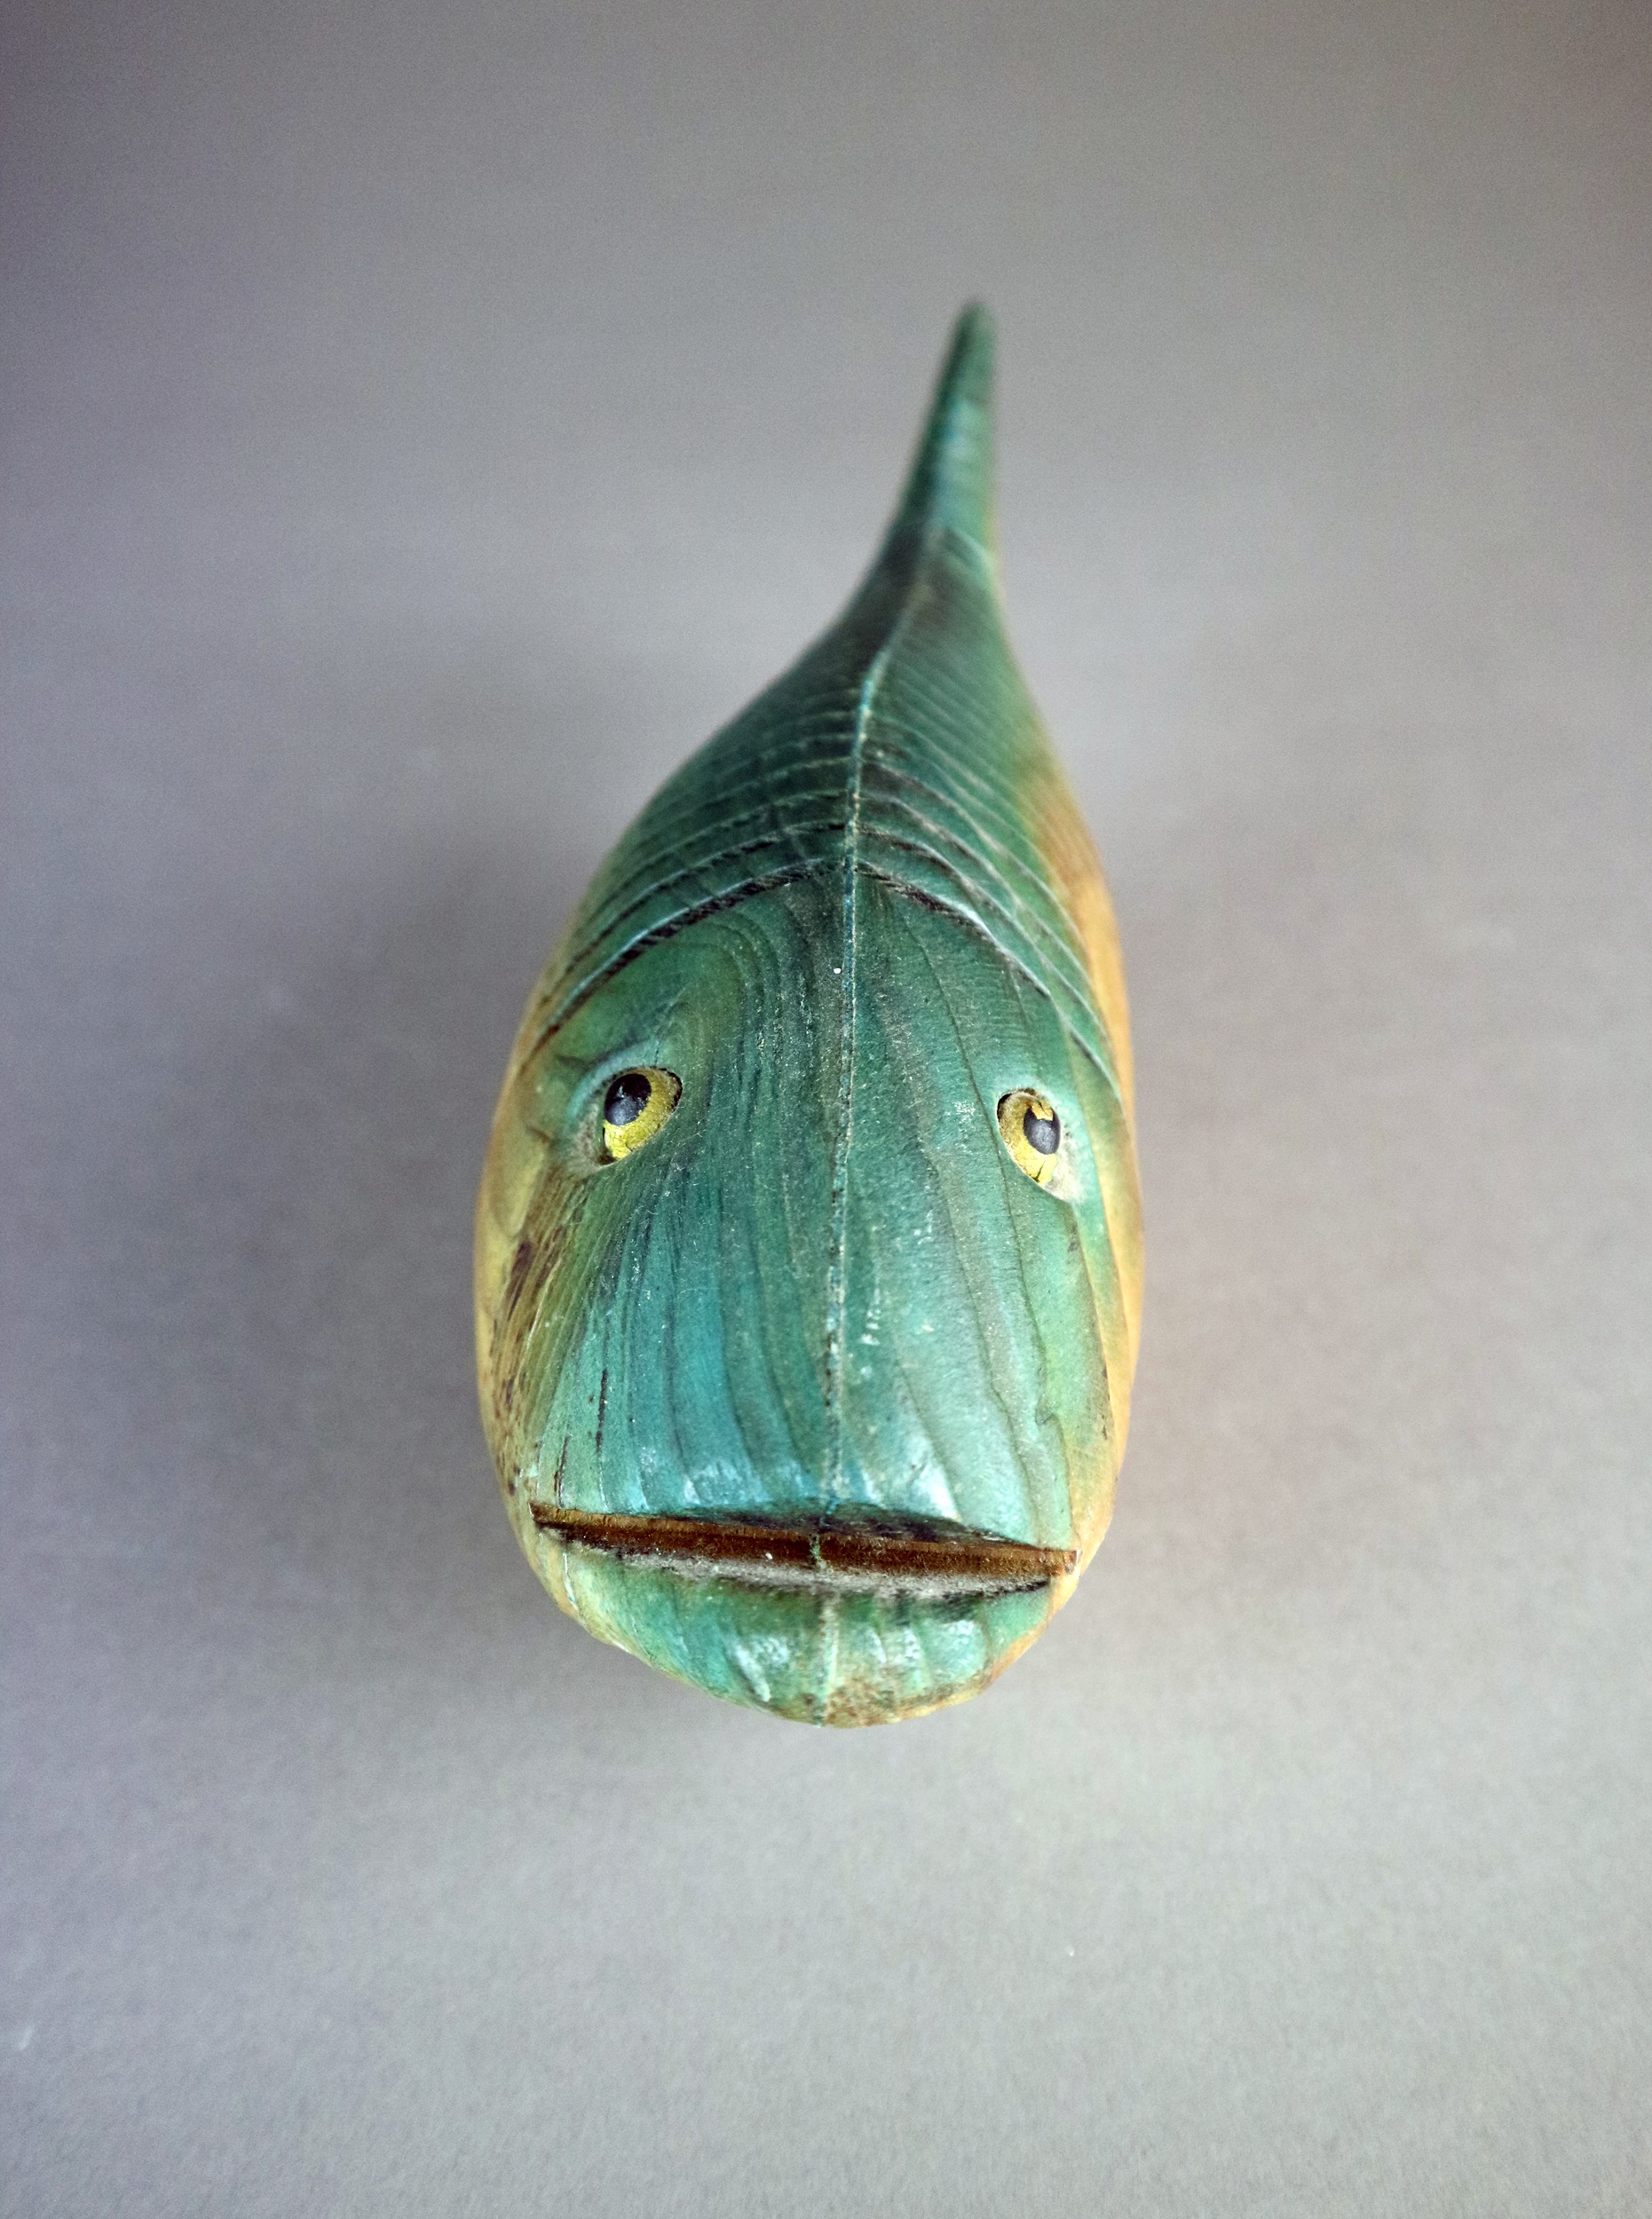 Jeff Soan (British 20th Century) Articulated Fish, wooden sculpture, measurements 9 x 24 x 7 cm - Image 2 of 3